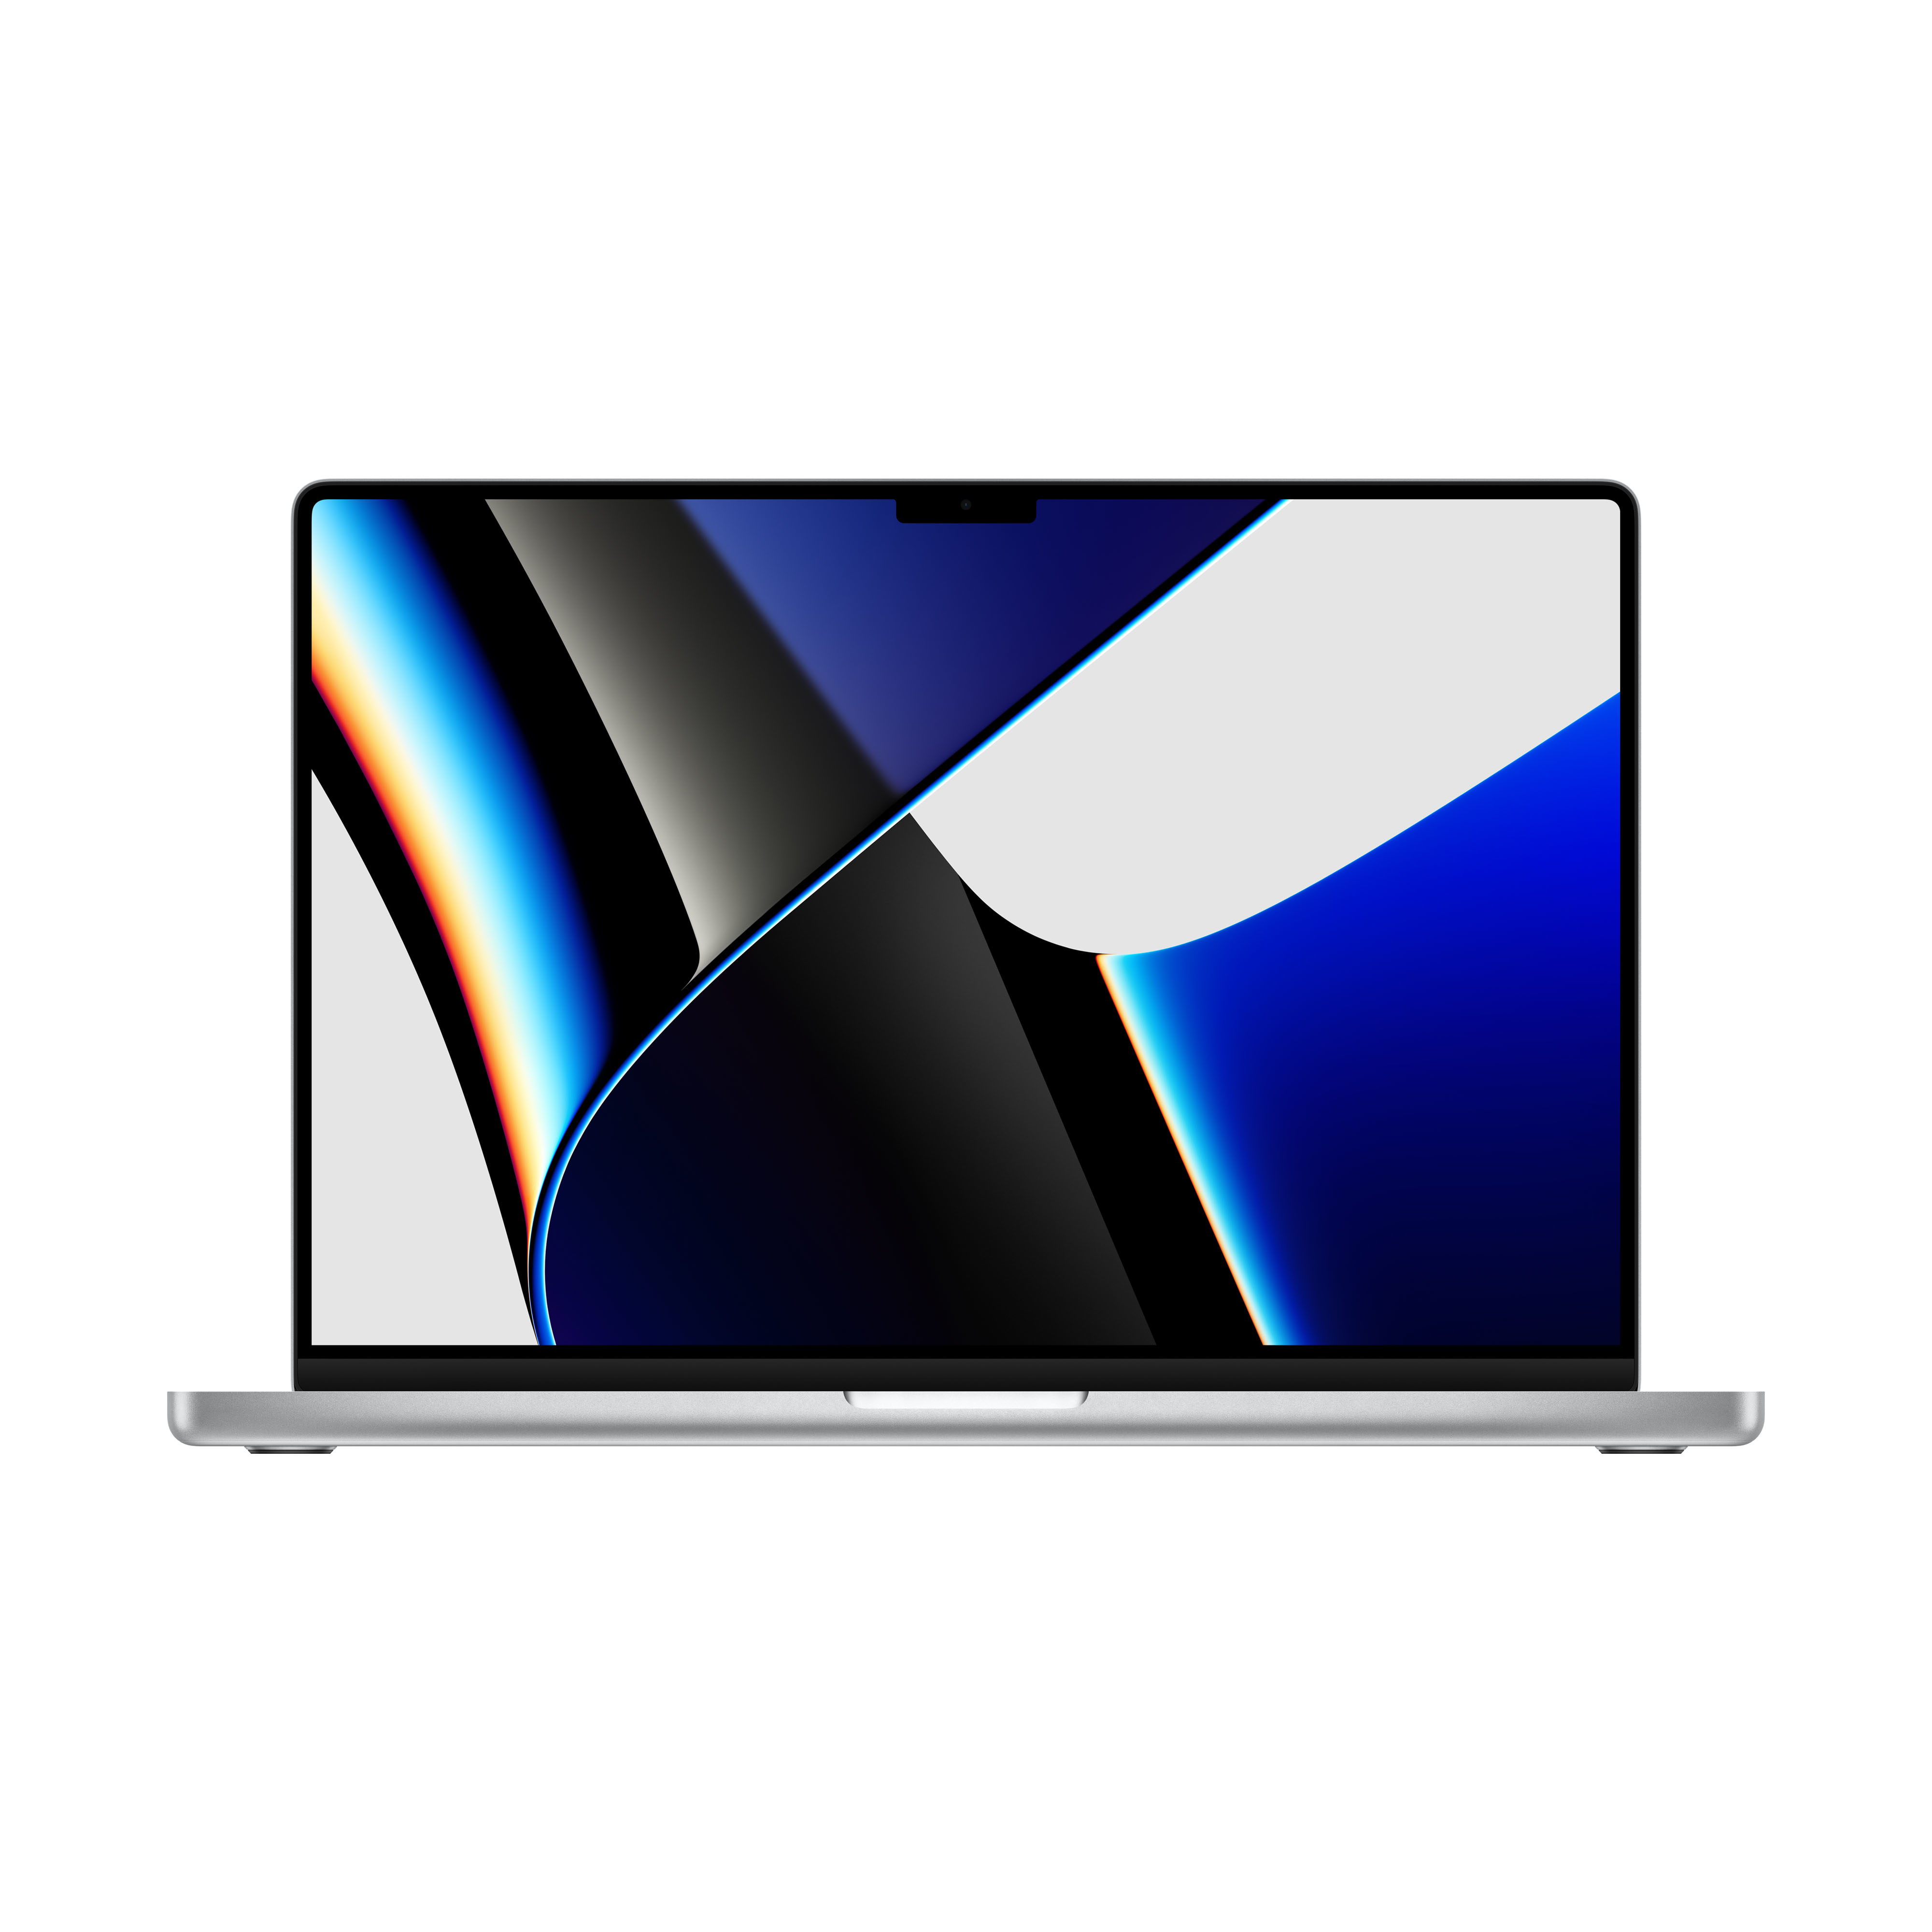  16inch (2021) MacBook Pro  M1 Max chip with 10-core CPU and 32-core GPU 1TB SSD Silver Qwerty